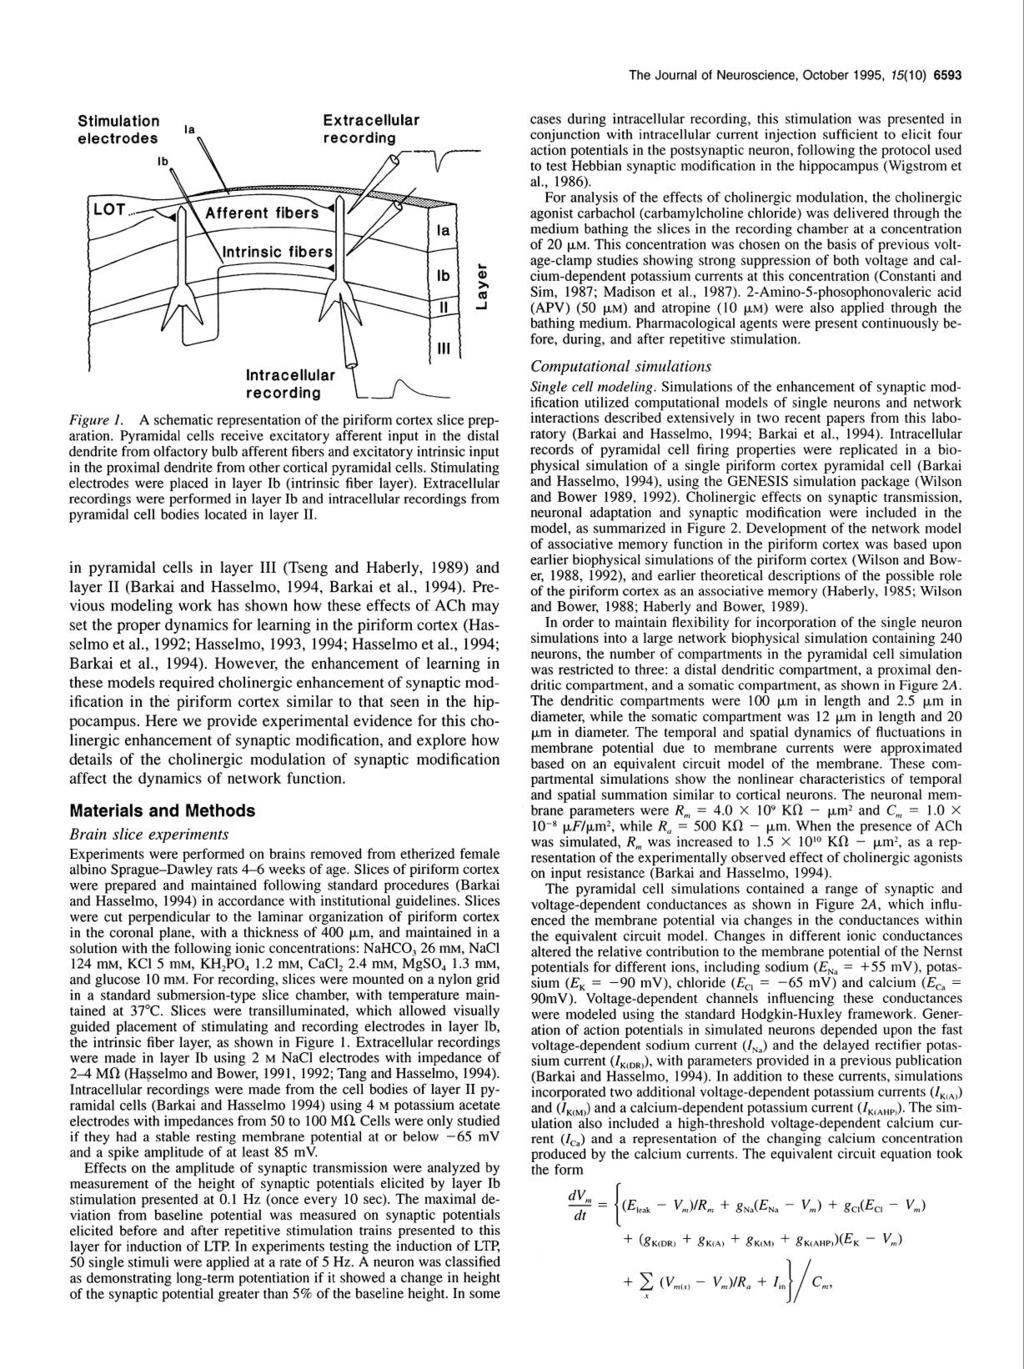 The Journal of Neuroscience, October 1995, 15(10) 6593 Stimulation,e Extracellular electrodes R recording Intracellular recording Figure 1 A schematic representation of the piriform cortex slice